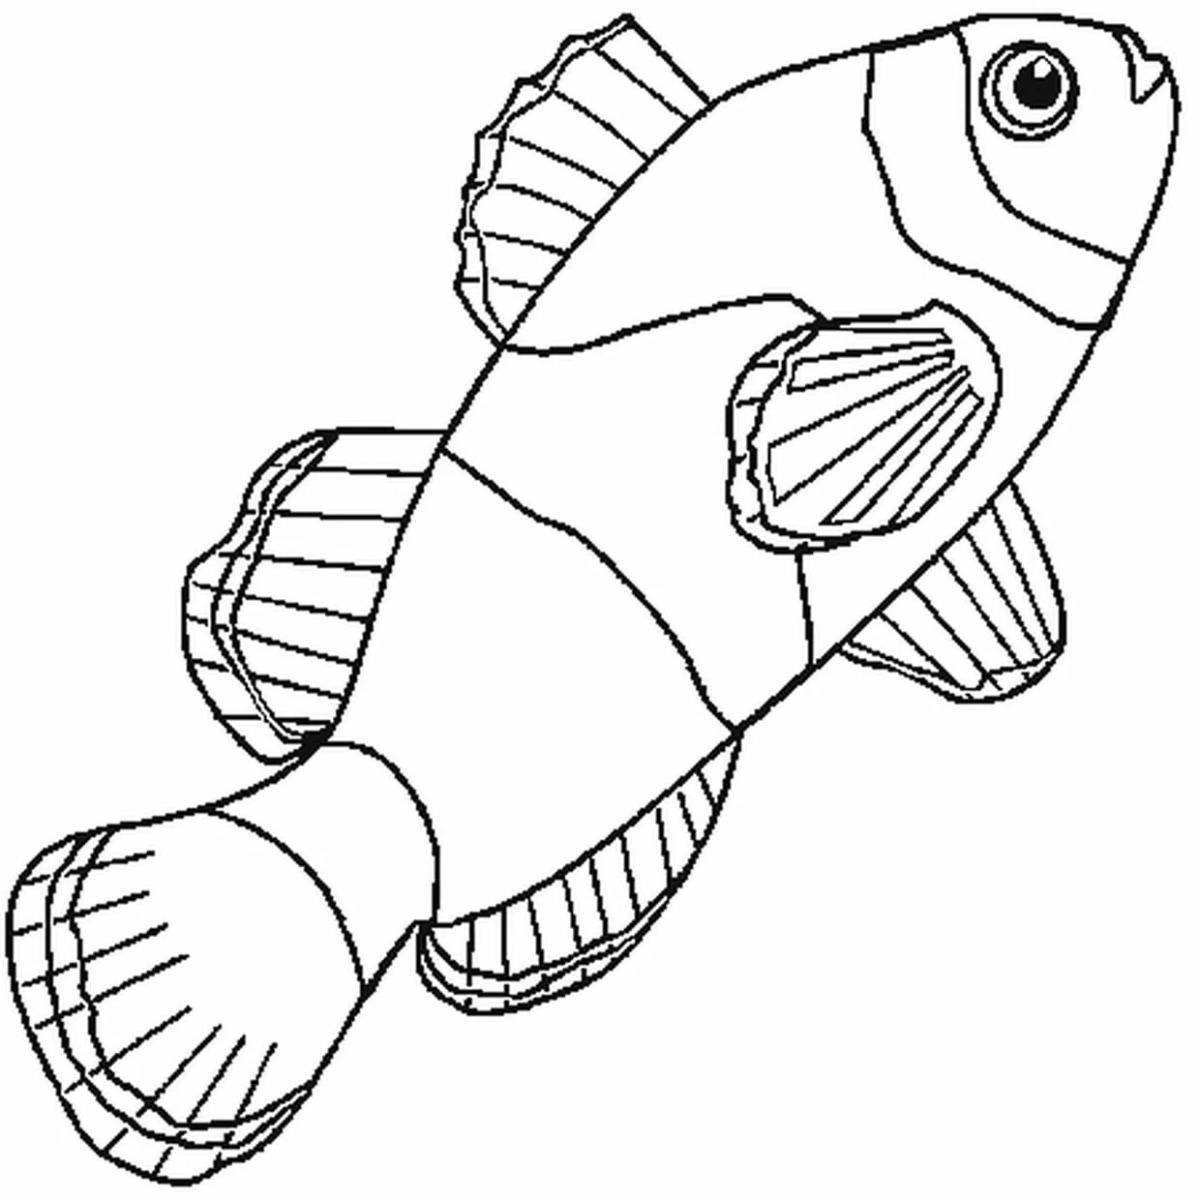 Attractive clownfish coloring book